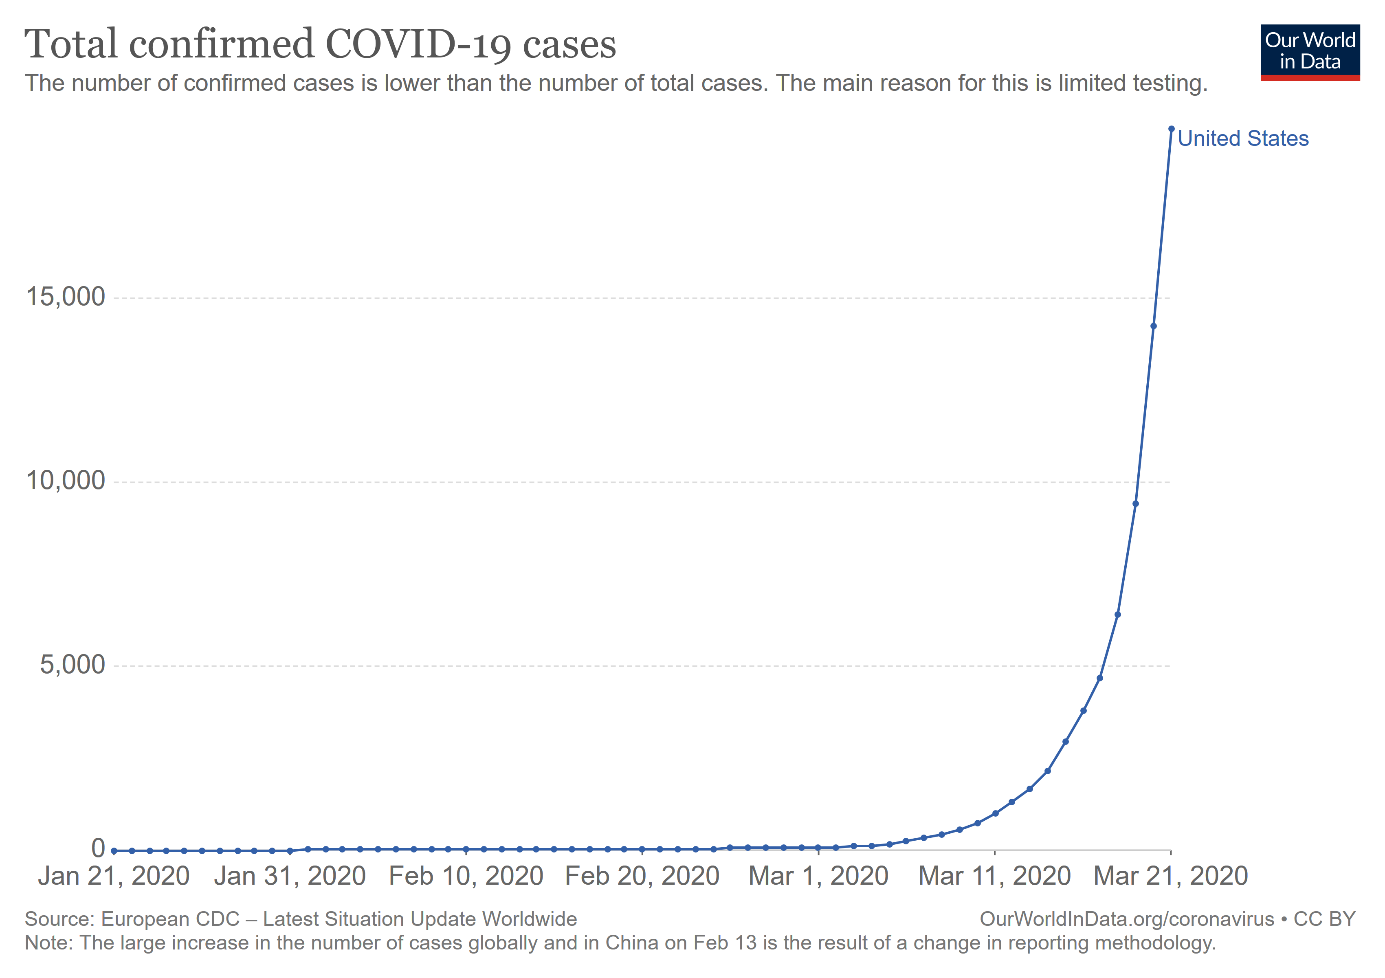 Total confirmed COVID-19 cases in the United States by March 21, 2020.